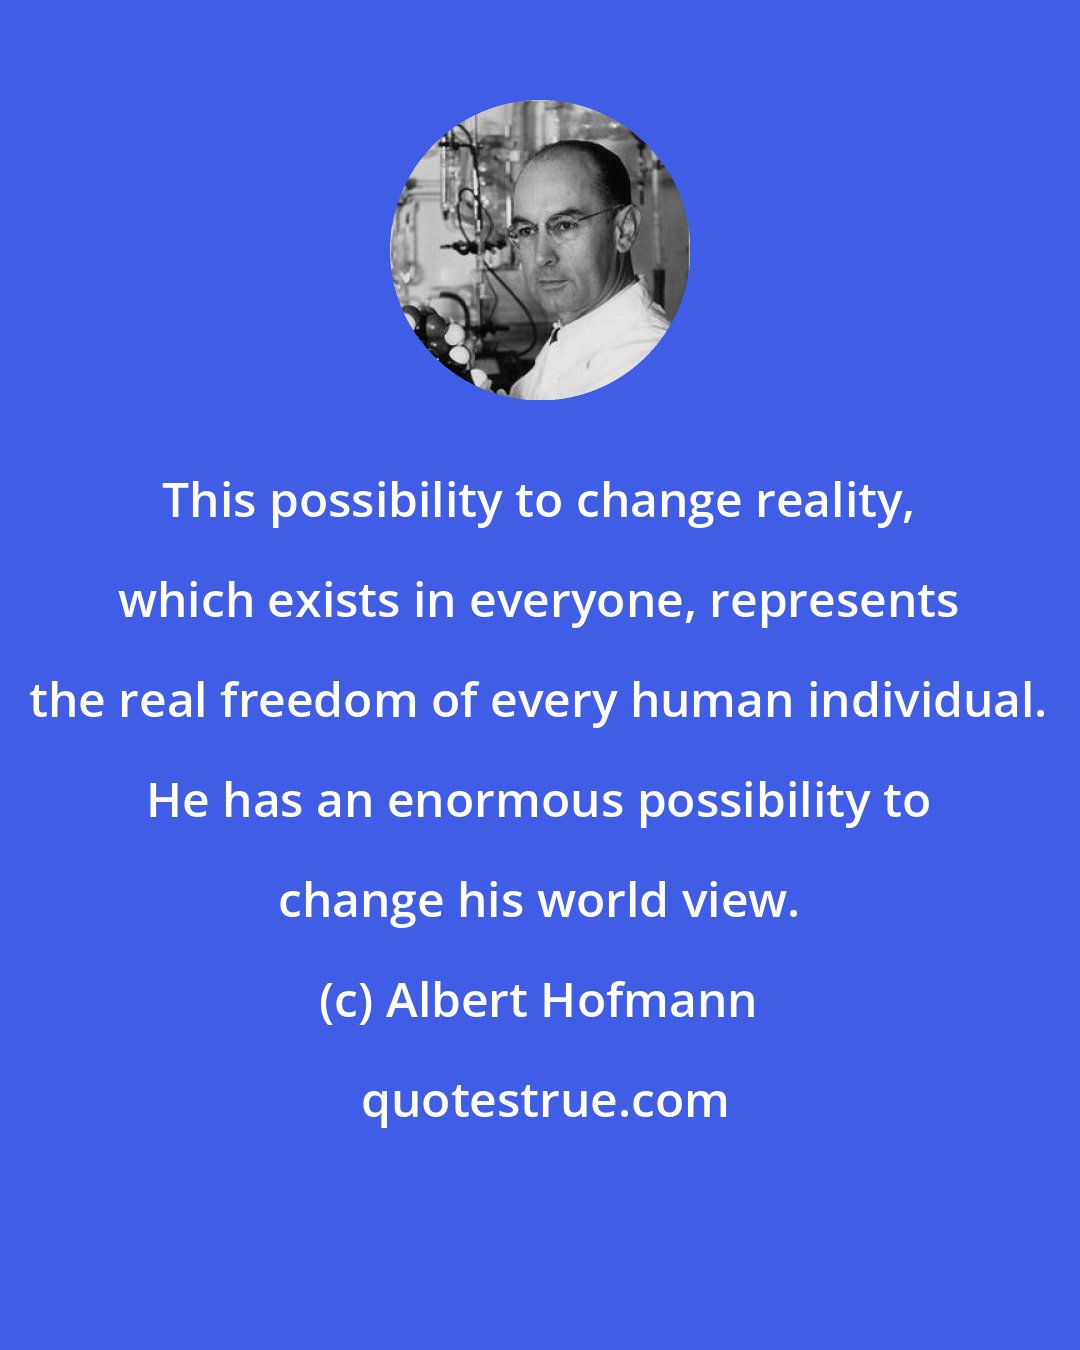 Albert Hofmann: This possibility to change reality, which exists in everyone, represents the real freedom of every human individual. He has an enormous possibility to change his world view.